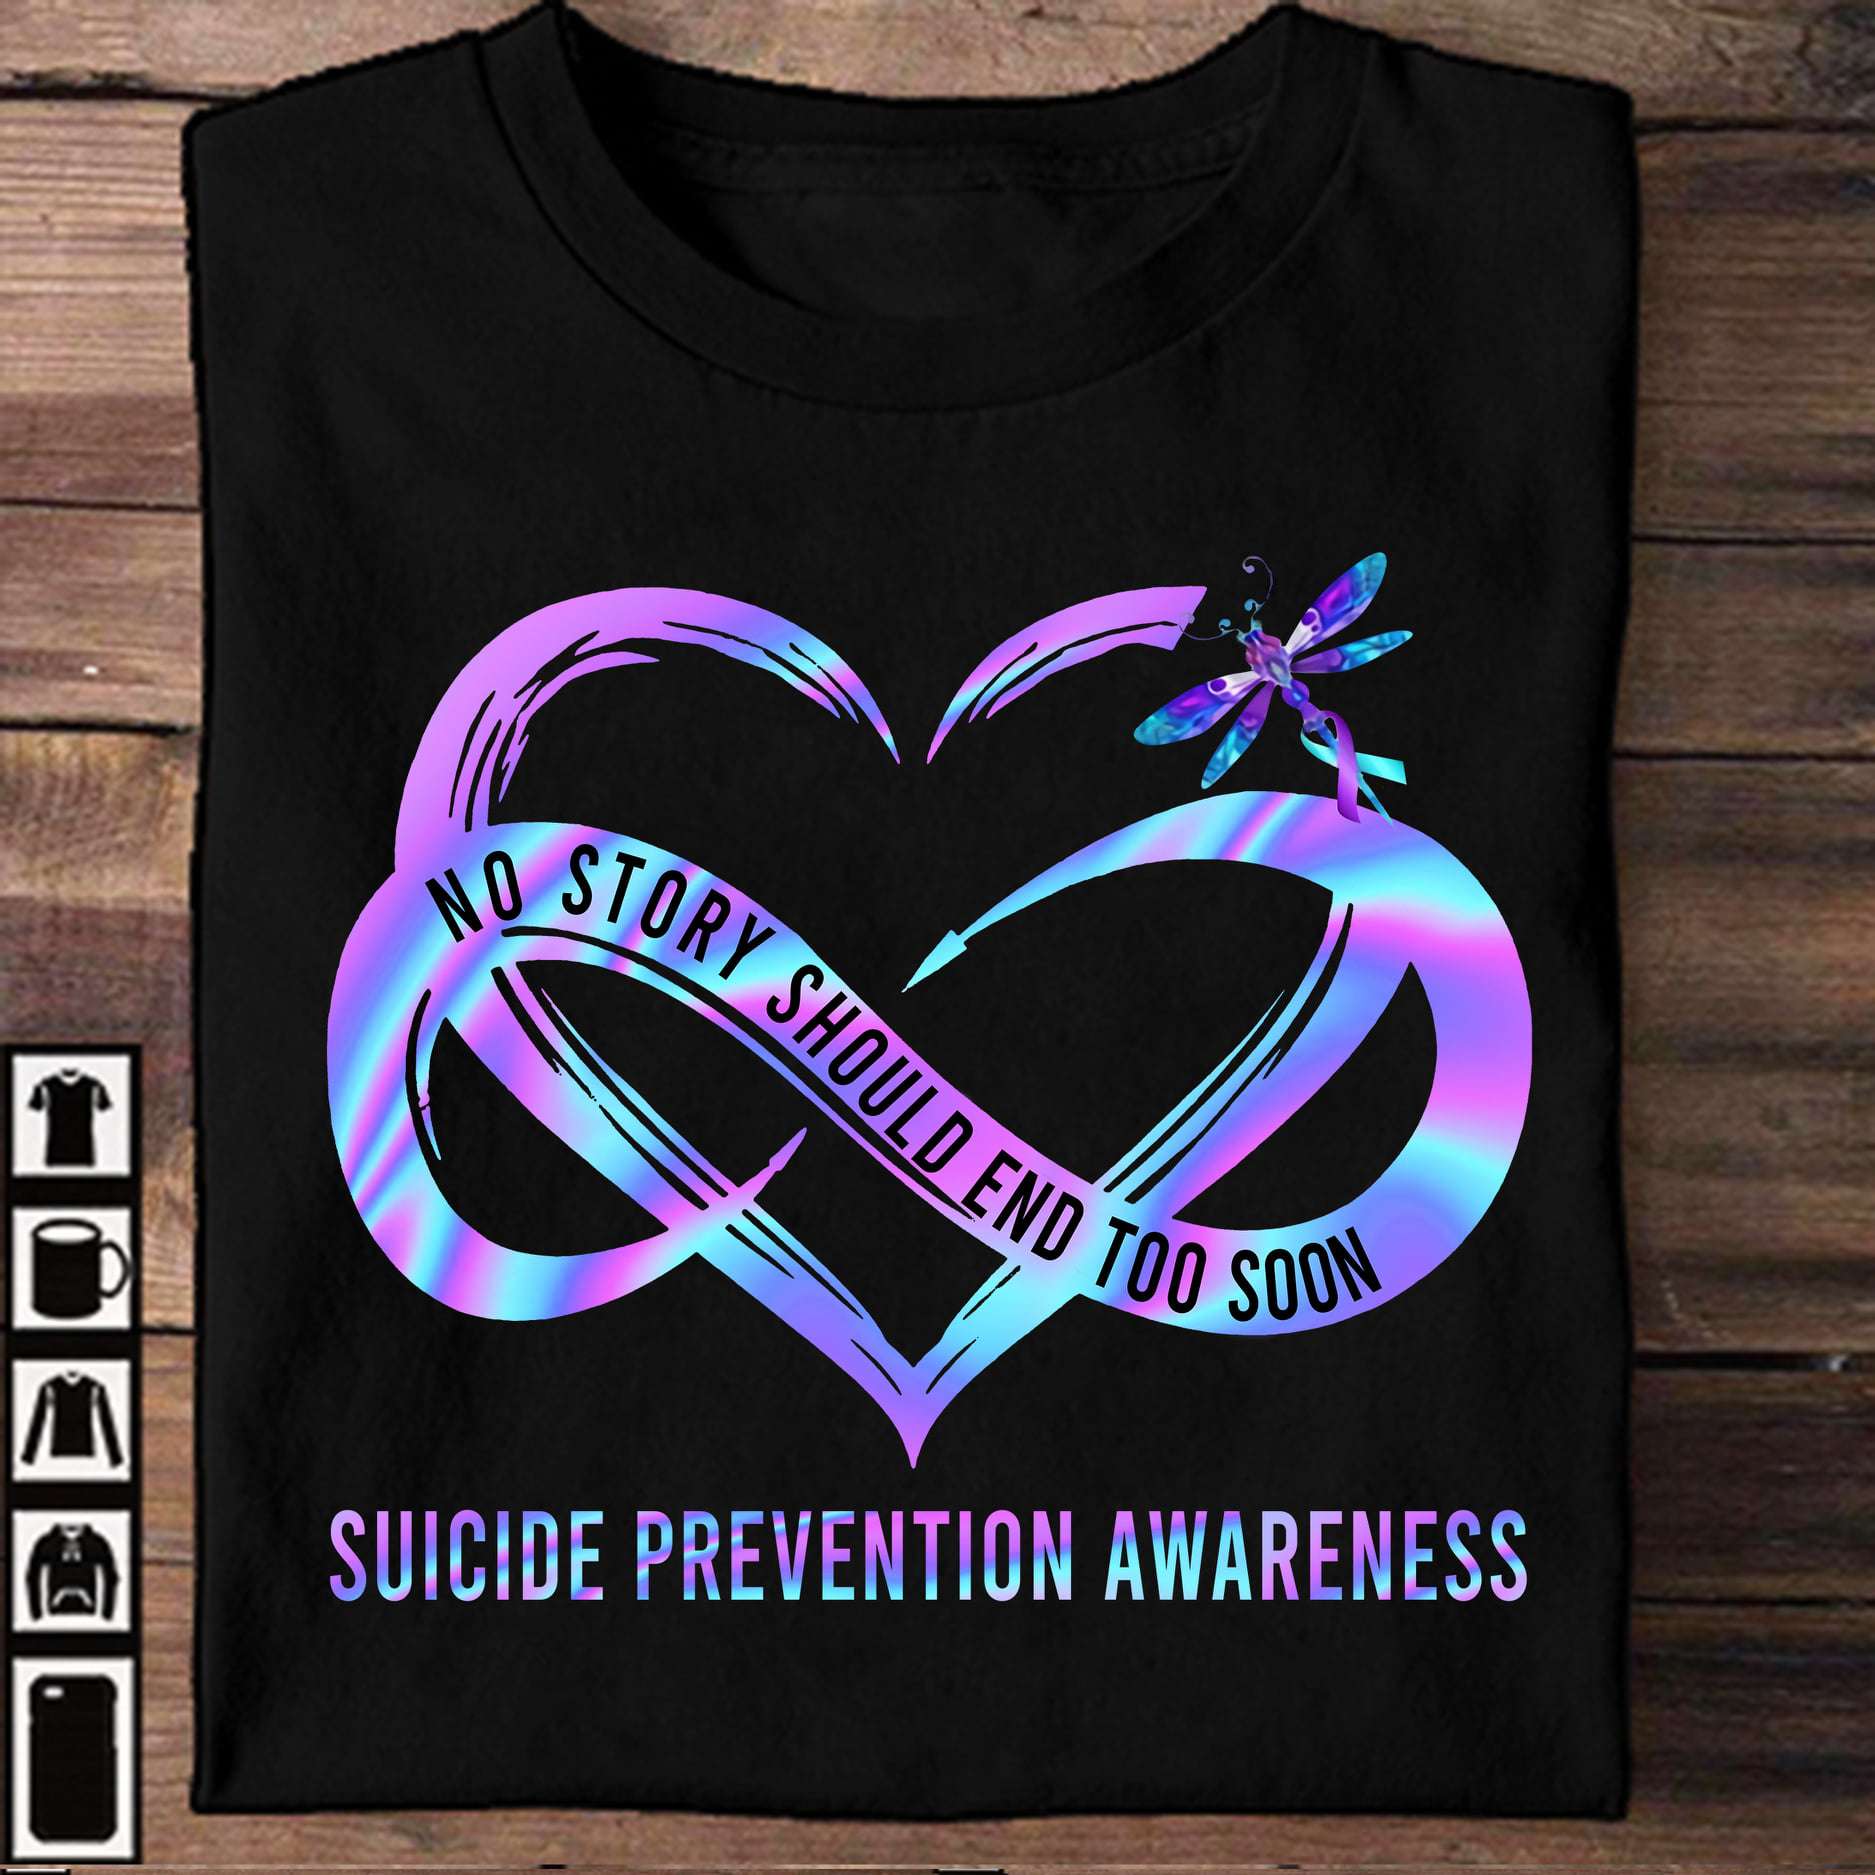 No story should end too soon - Suicide prevention awareness